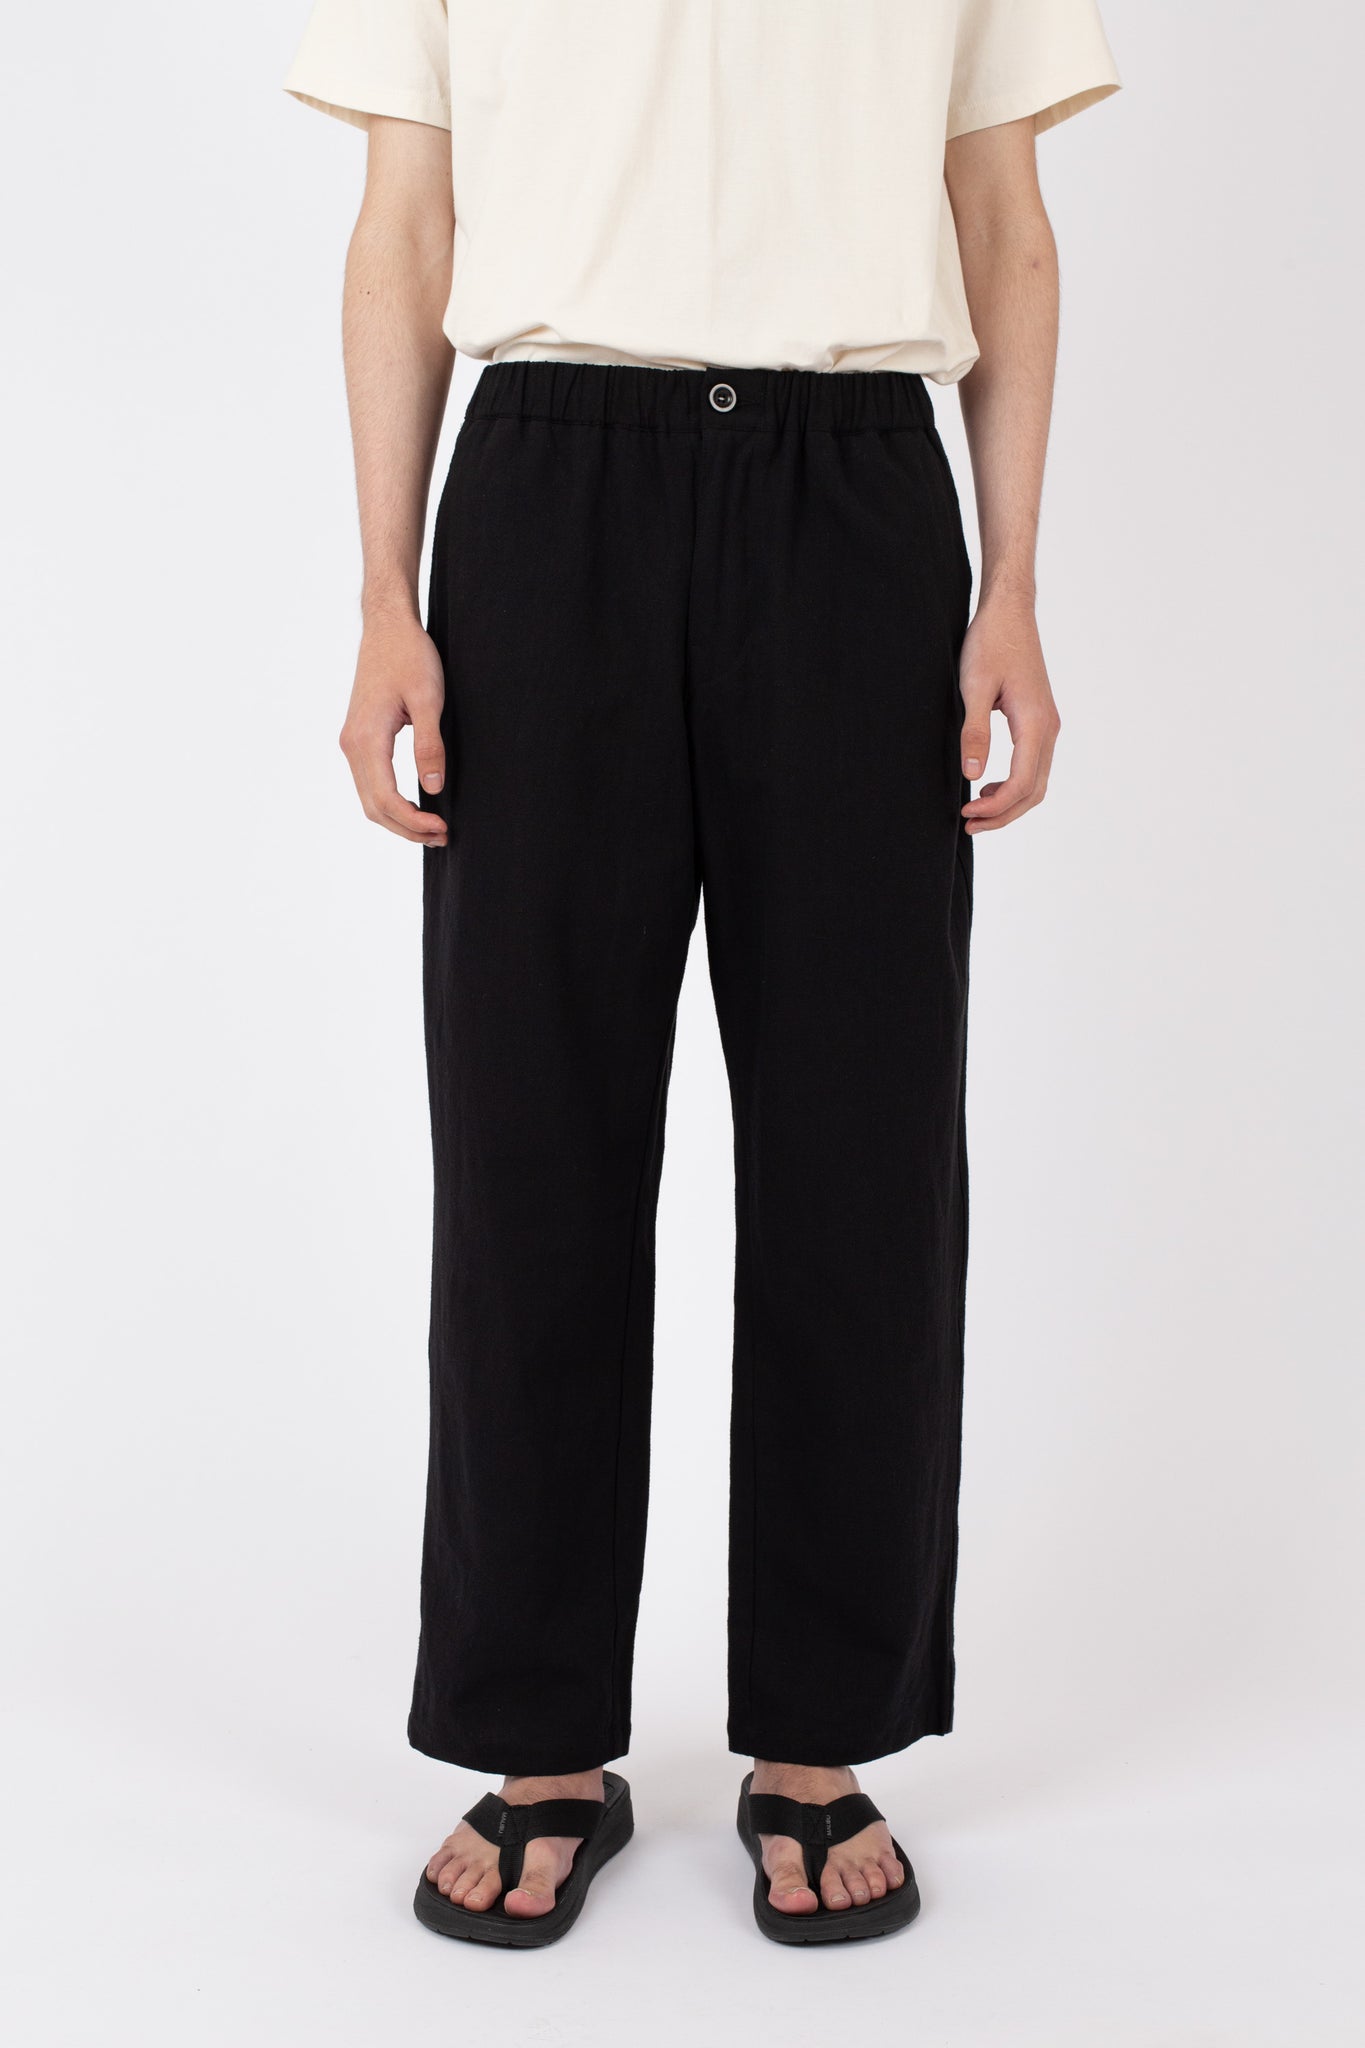 Relaxed Pant, Hachiko, Black